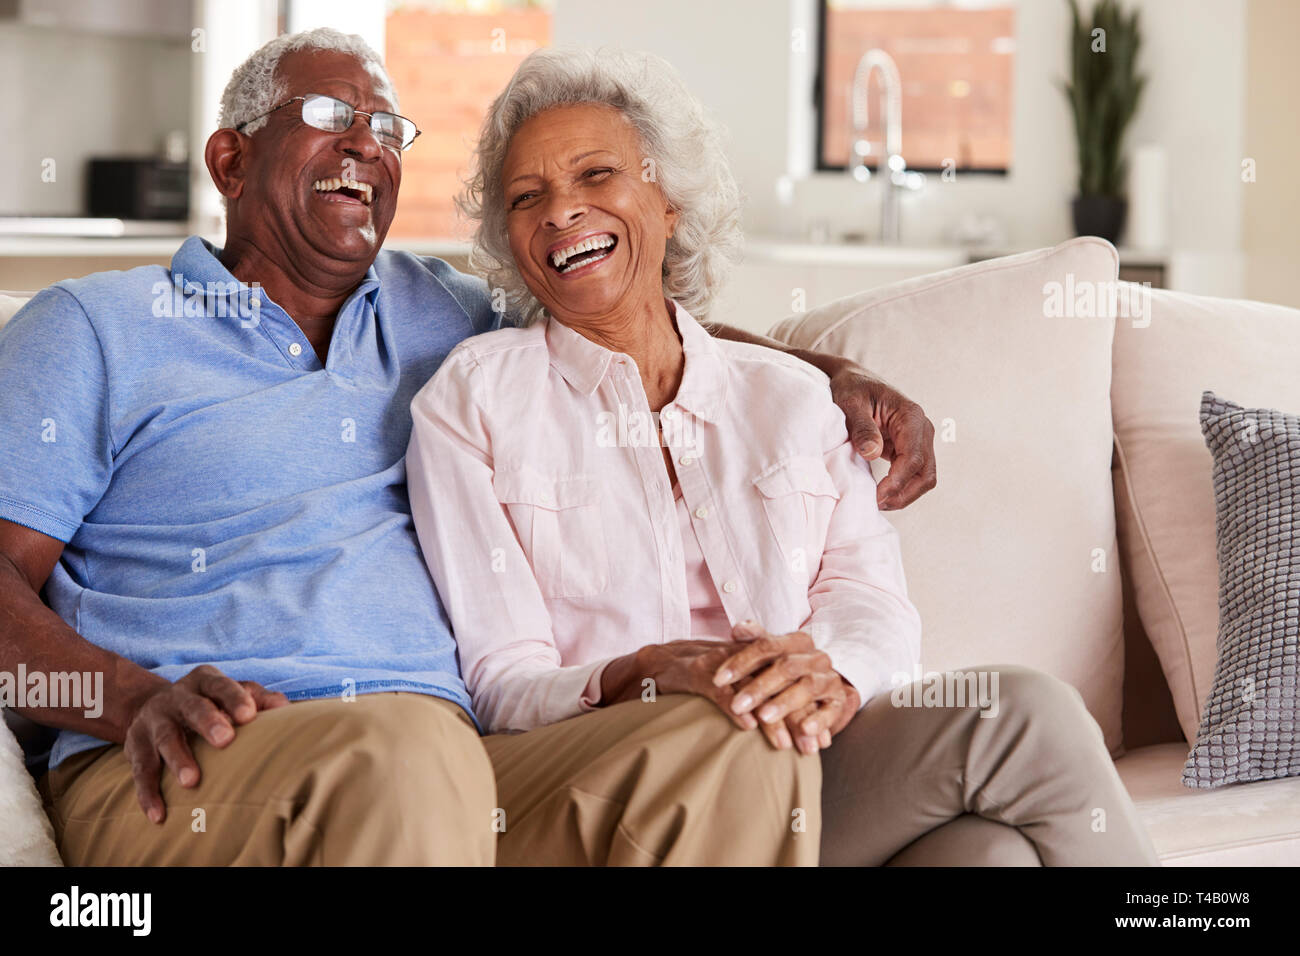 Loving Senior Couple Sitting On Sofa At Home And Laughing Together Stock Photo